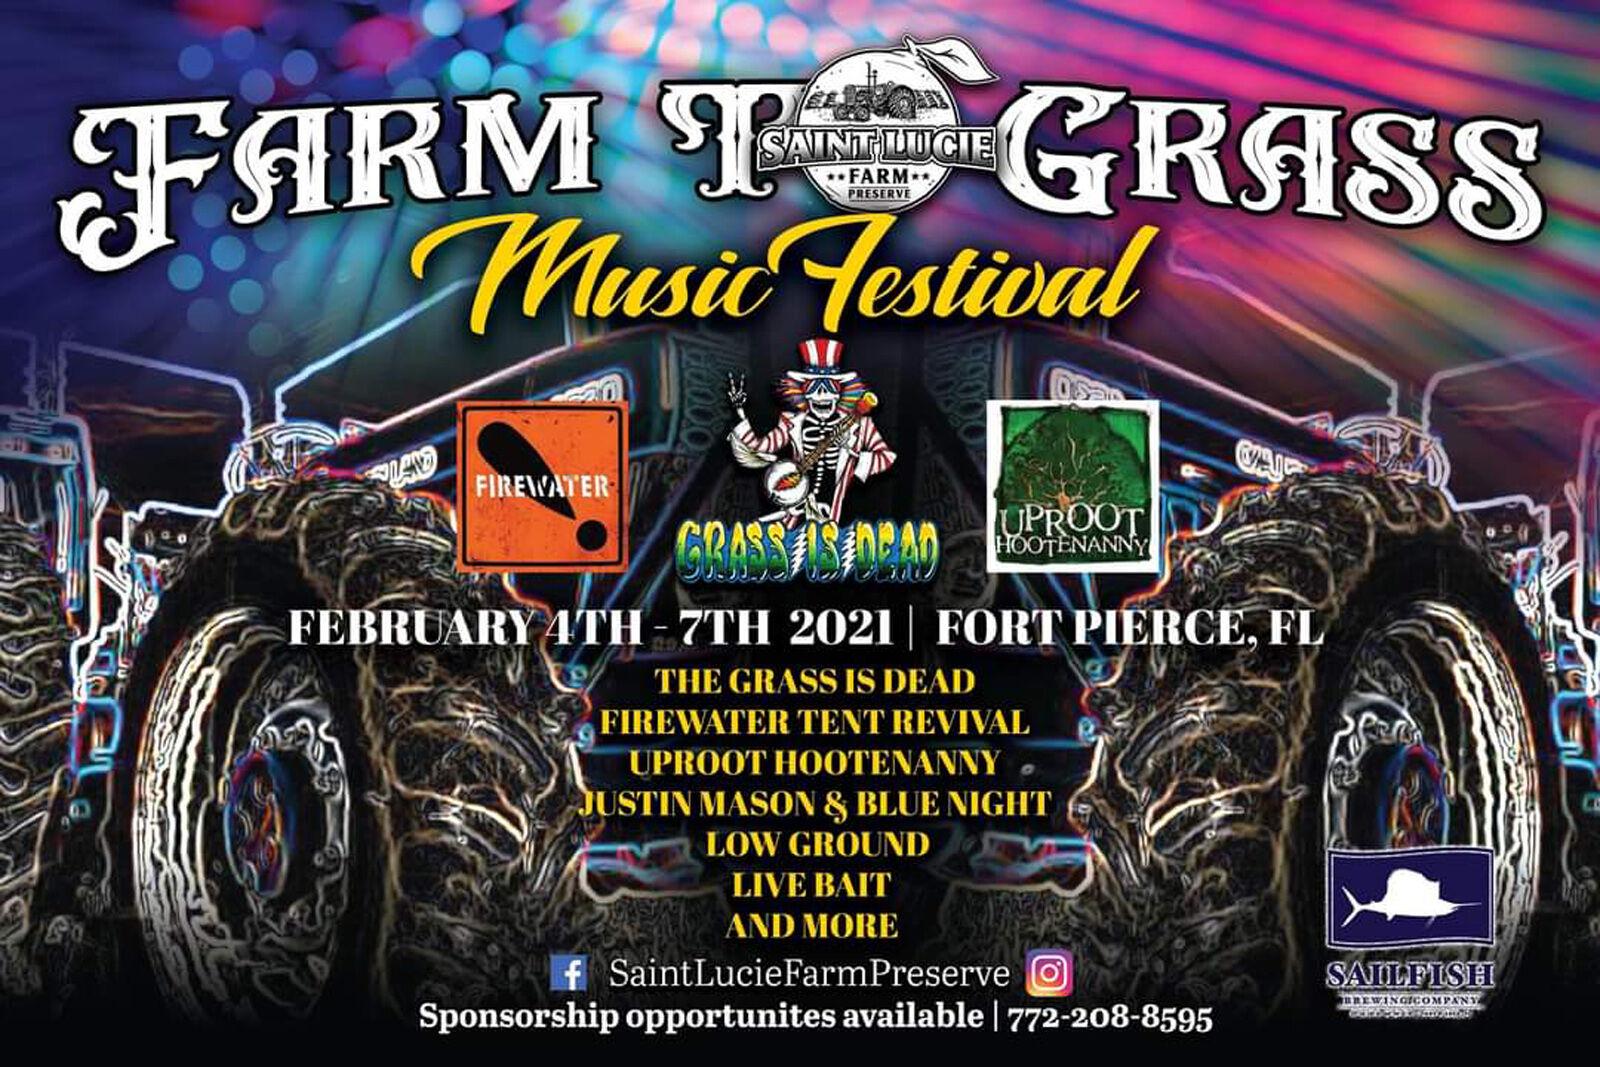 Farm to Grass Music Festival features many local bands Arts